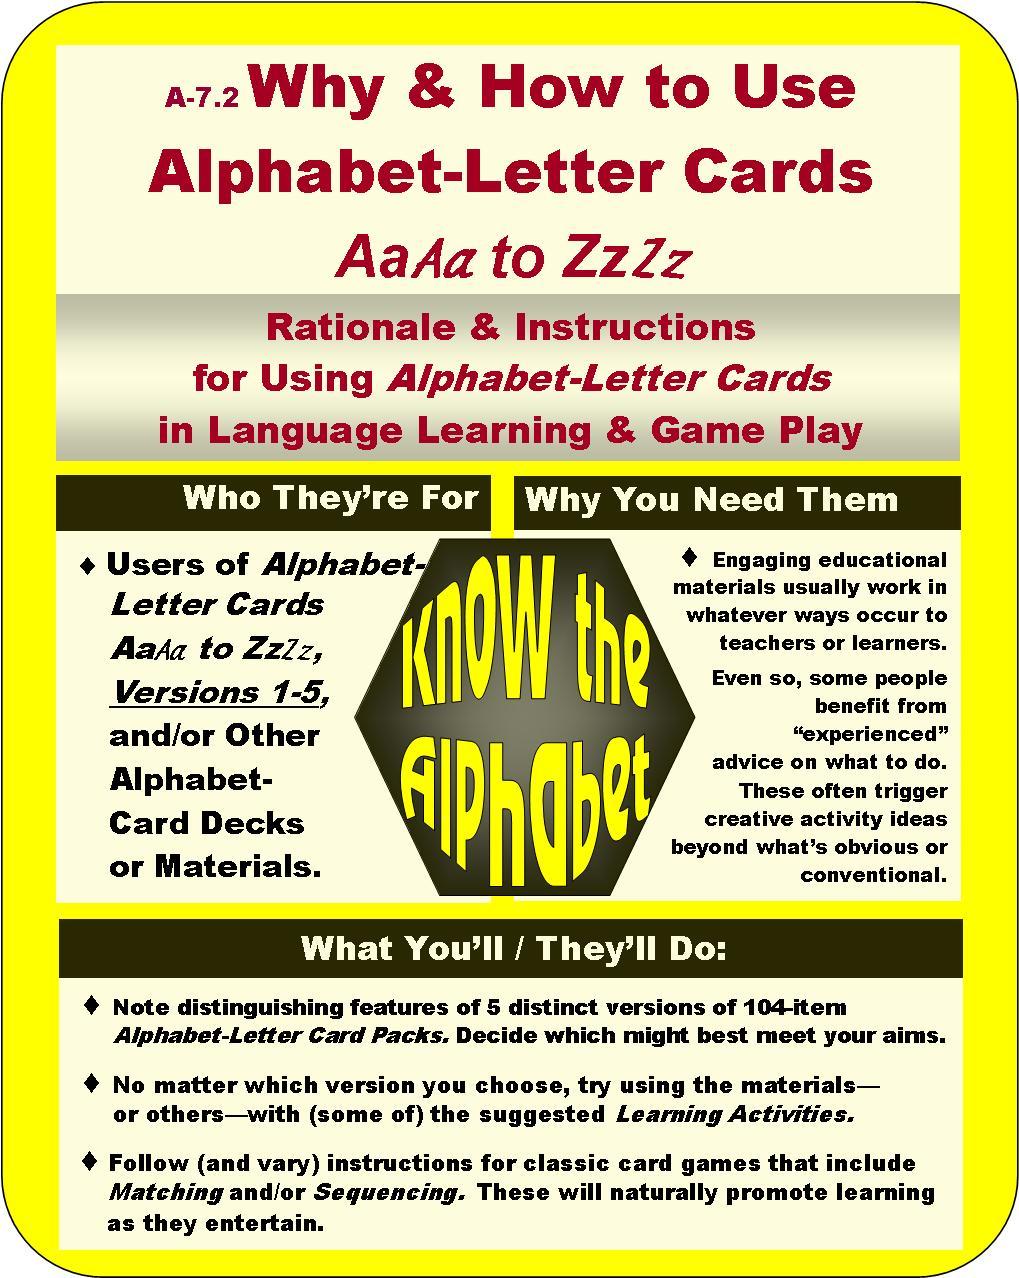 A-07.2: Learn Why & How to Use Alphabet-Letter Cards AaAa to ZzZz